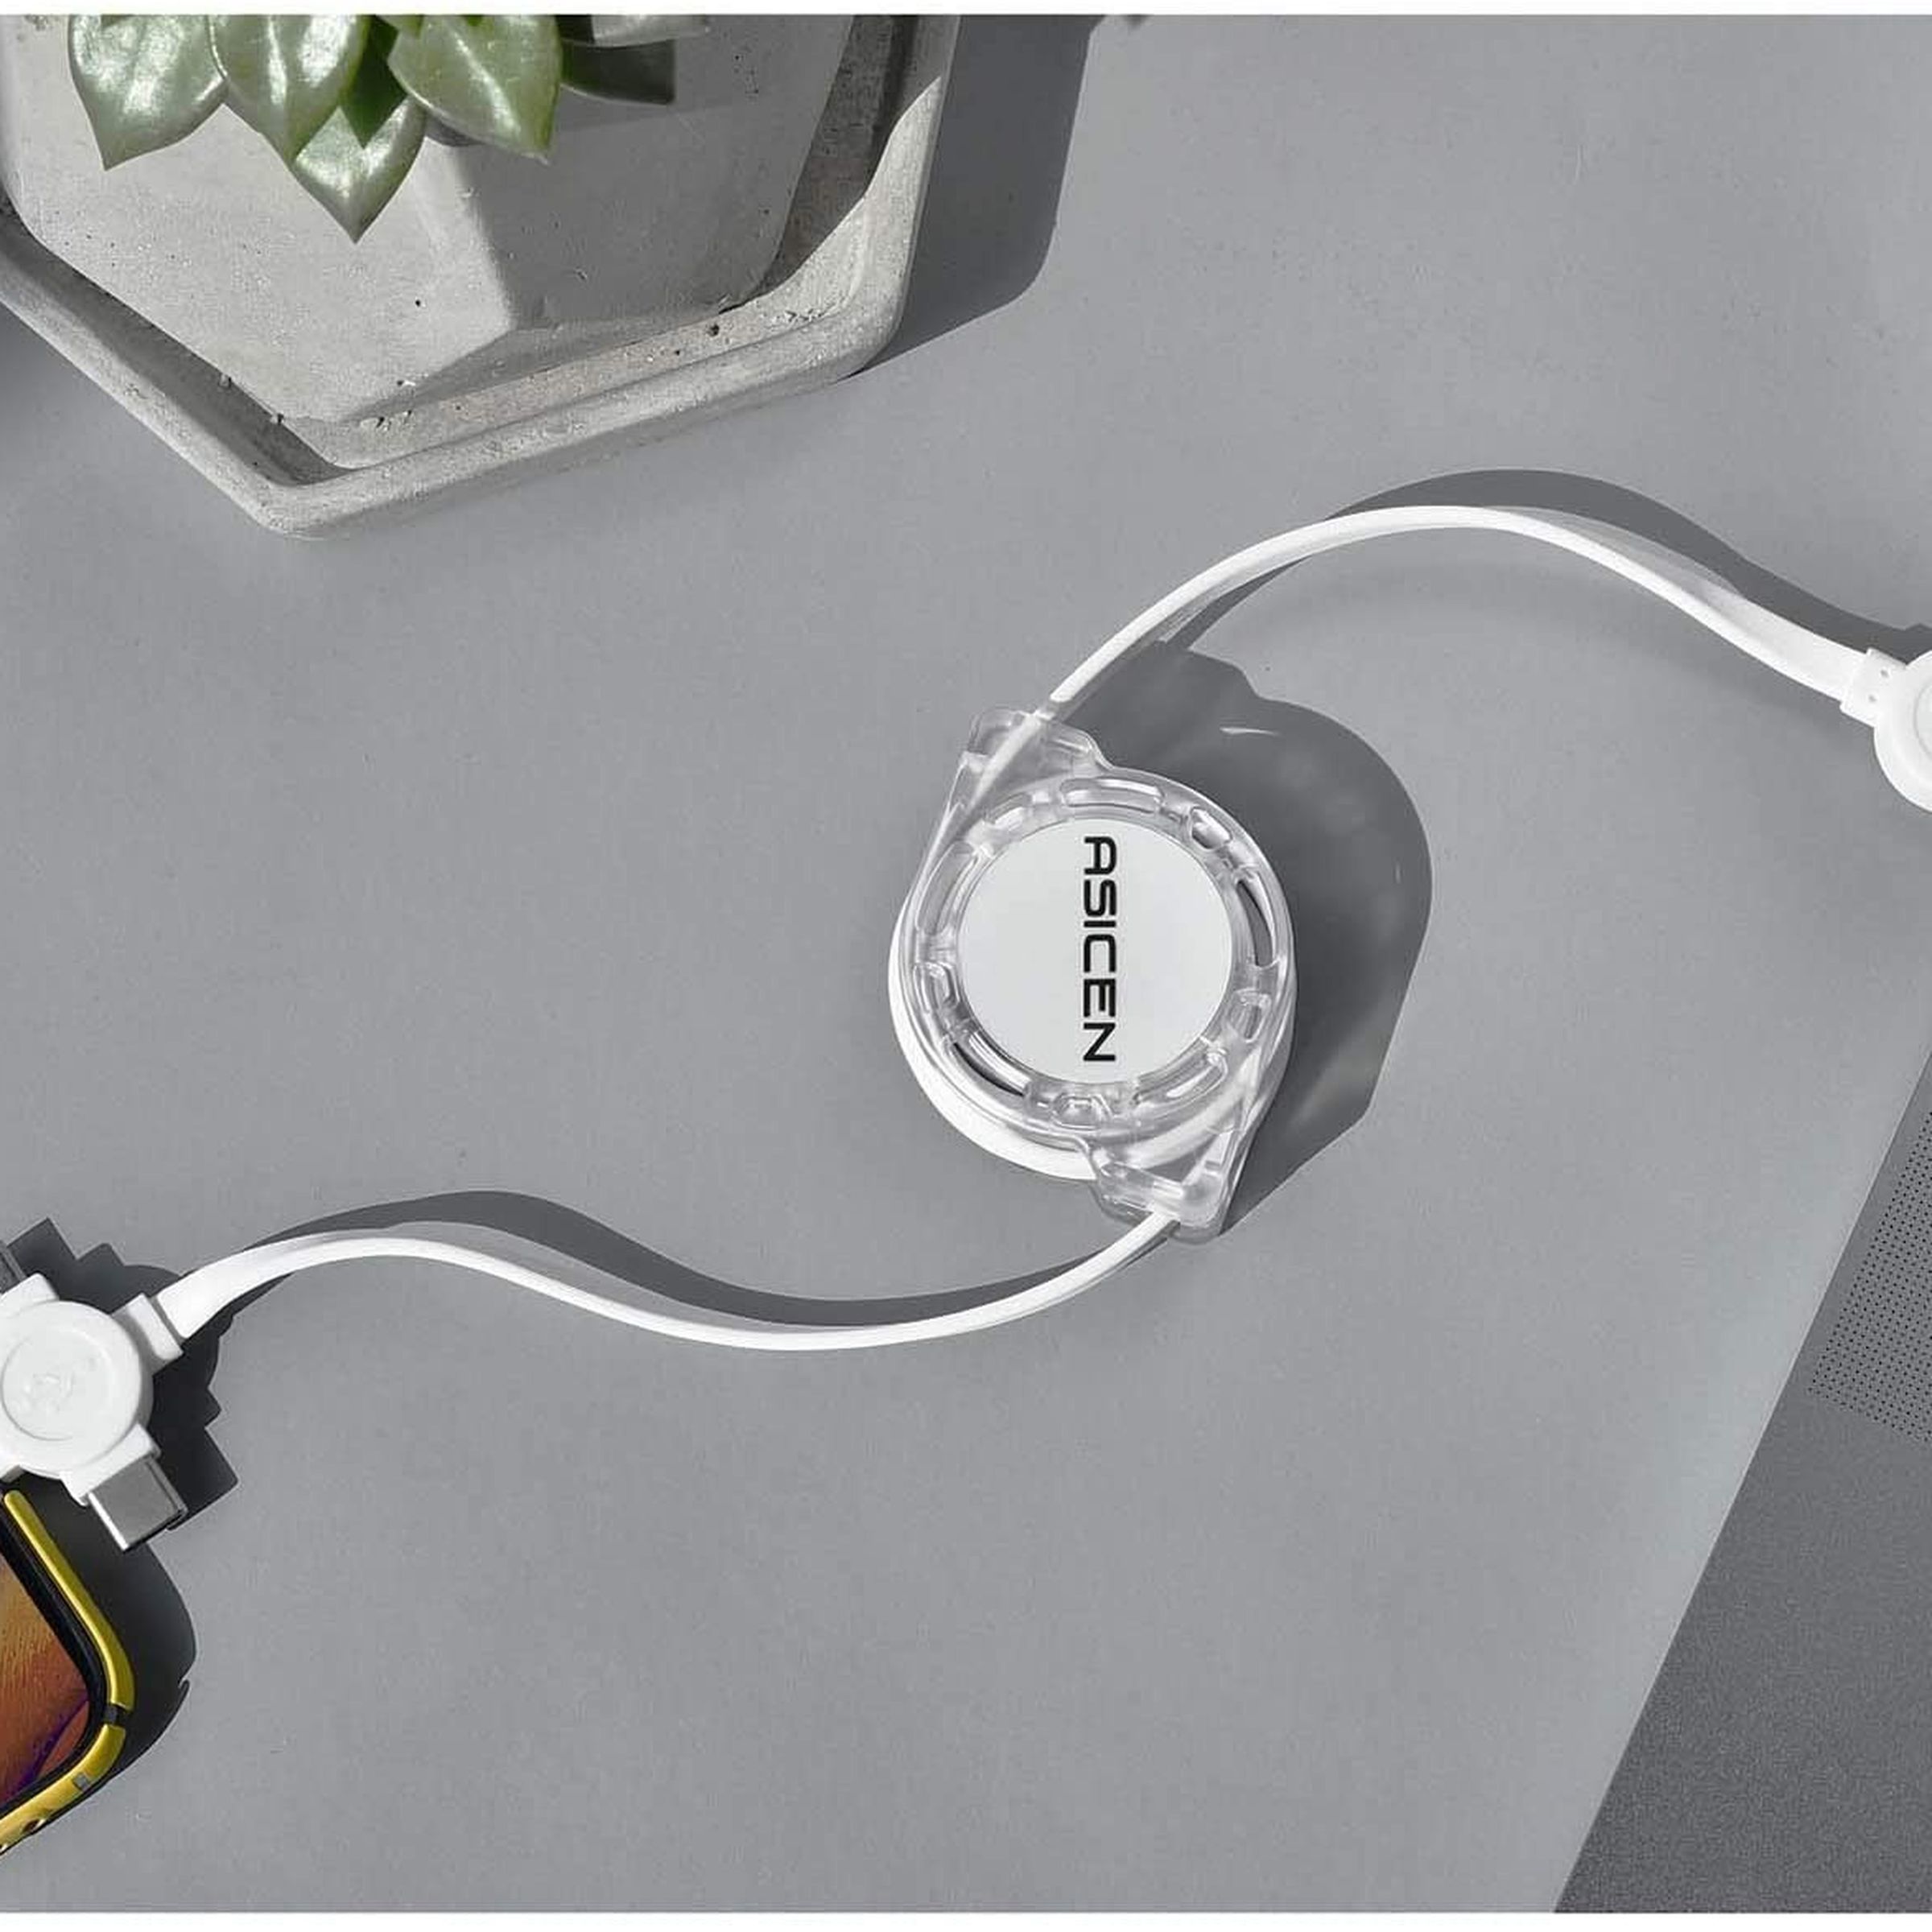 The Asicen retractable 3-in-1 charging cable plugged into a phone and laptop.